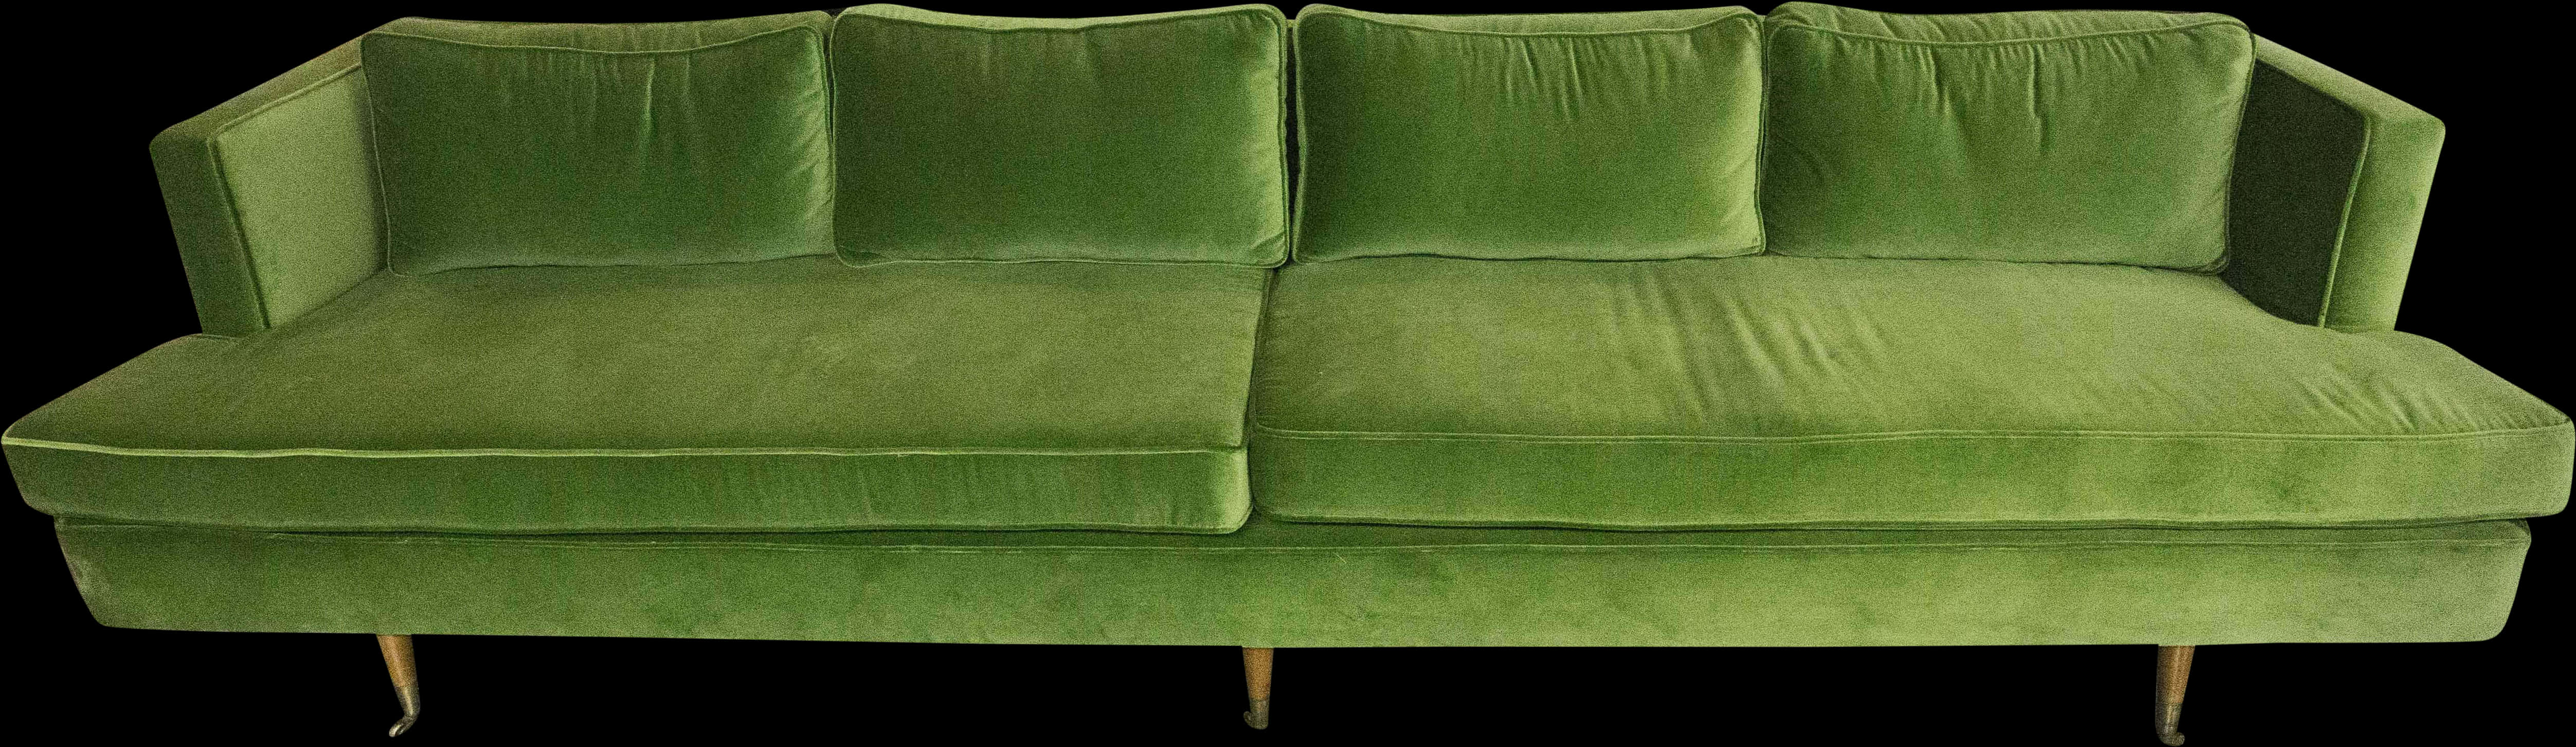 A Green Couch With Wooden Legs